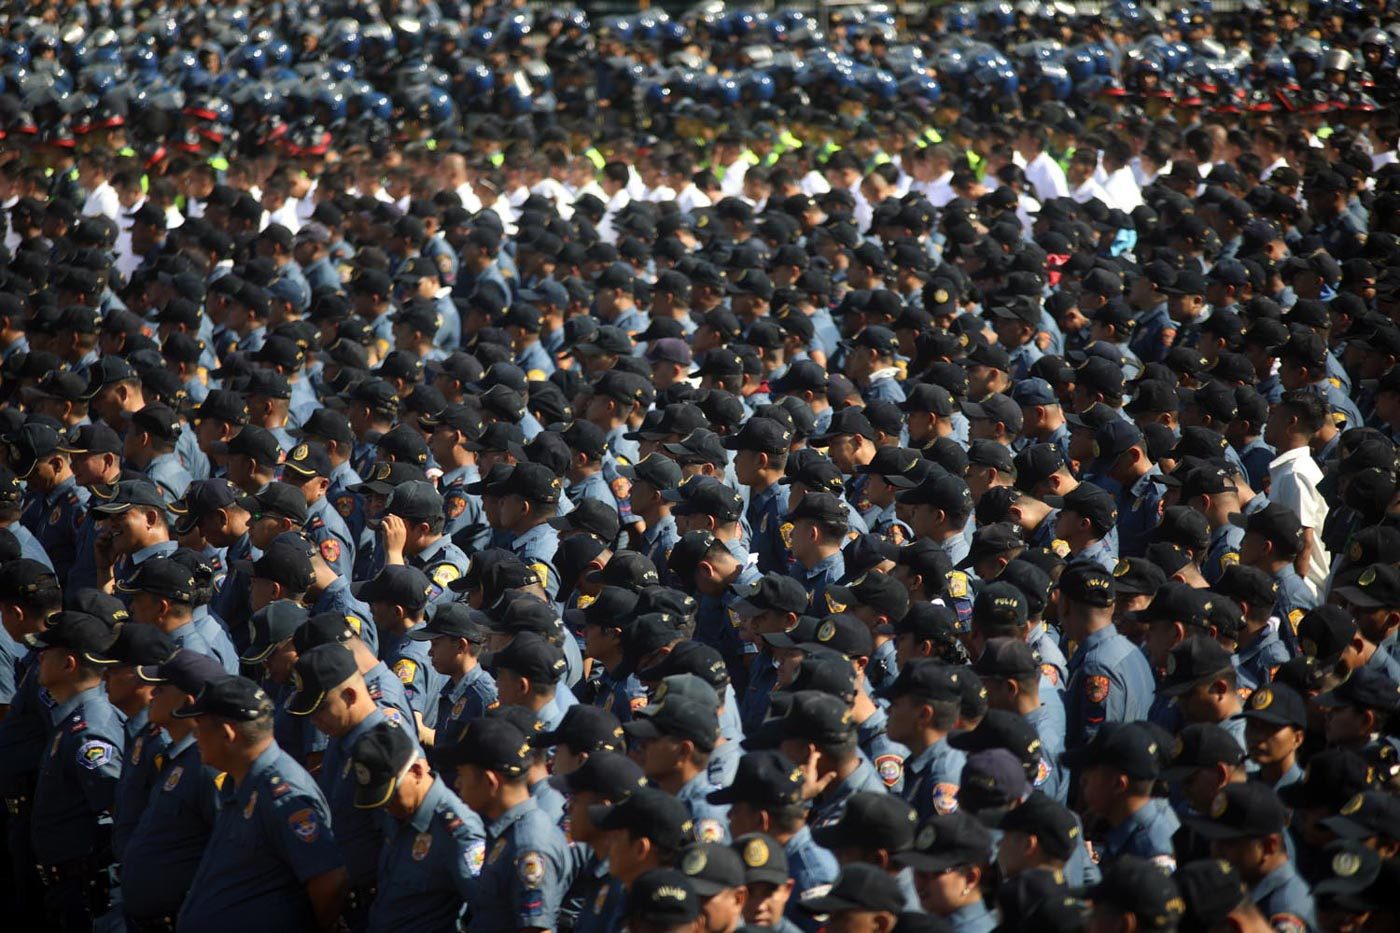 Over 5,000 cops to secure Xi visit